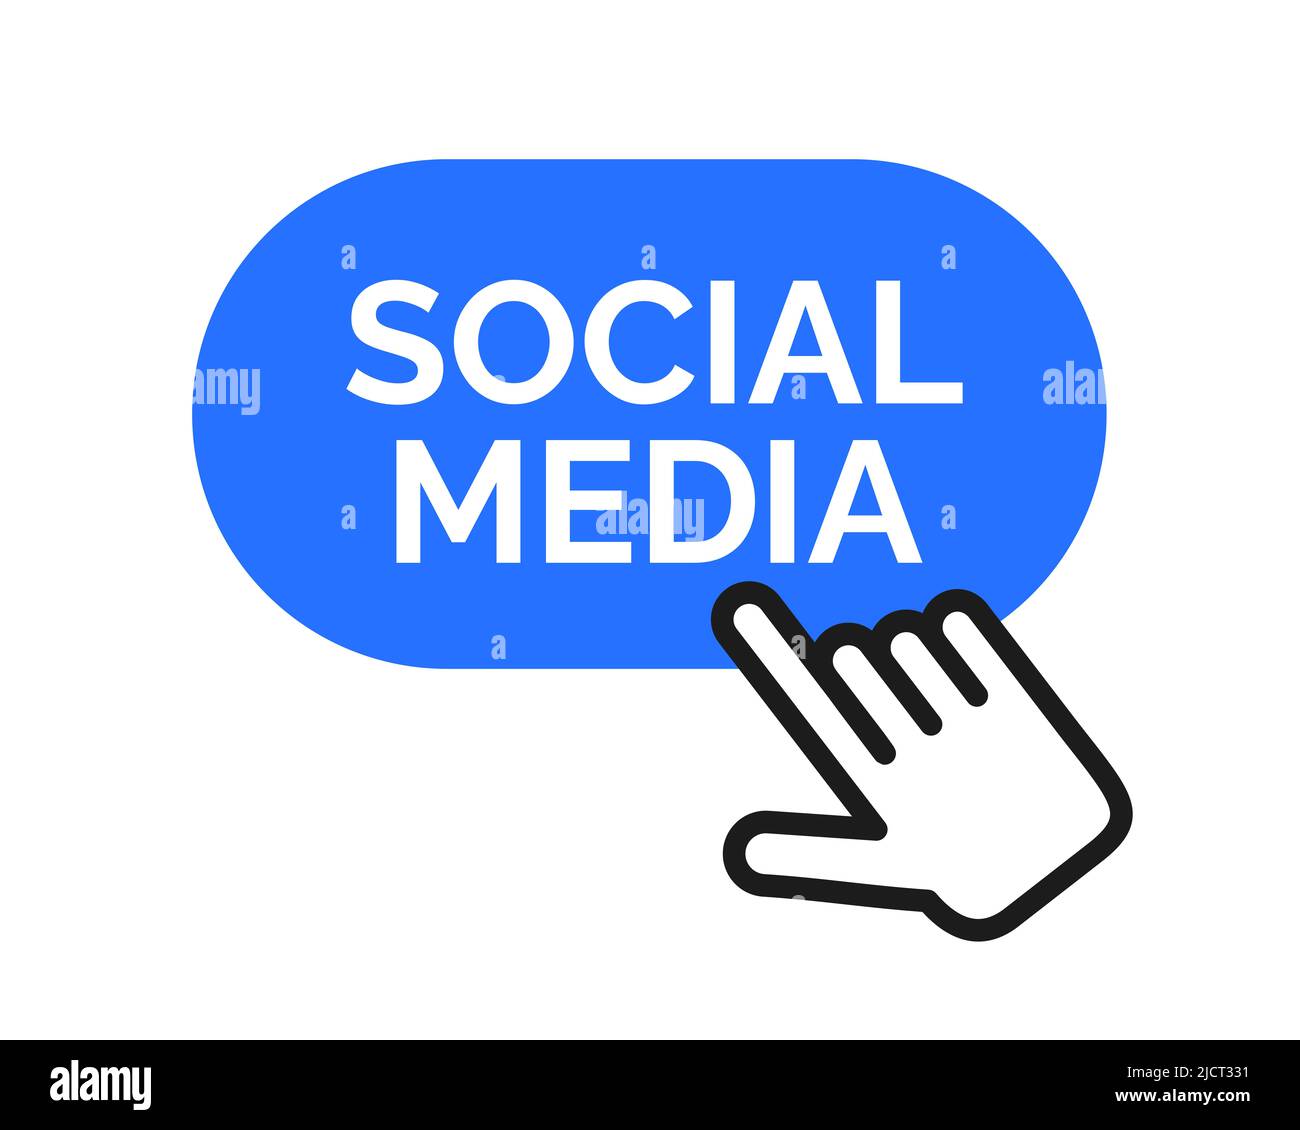 Social media - internet user is going to click and enter to social networking site, website and service. Vector illustration isolated on white. Stock Photo